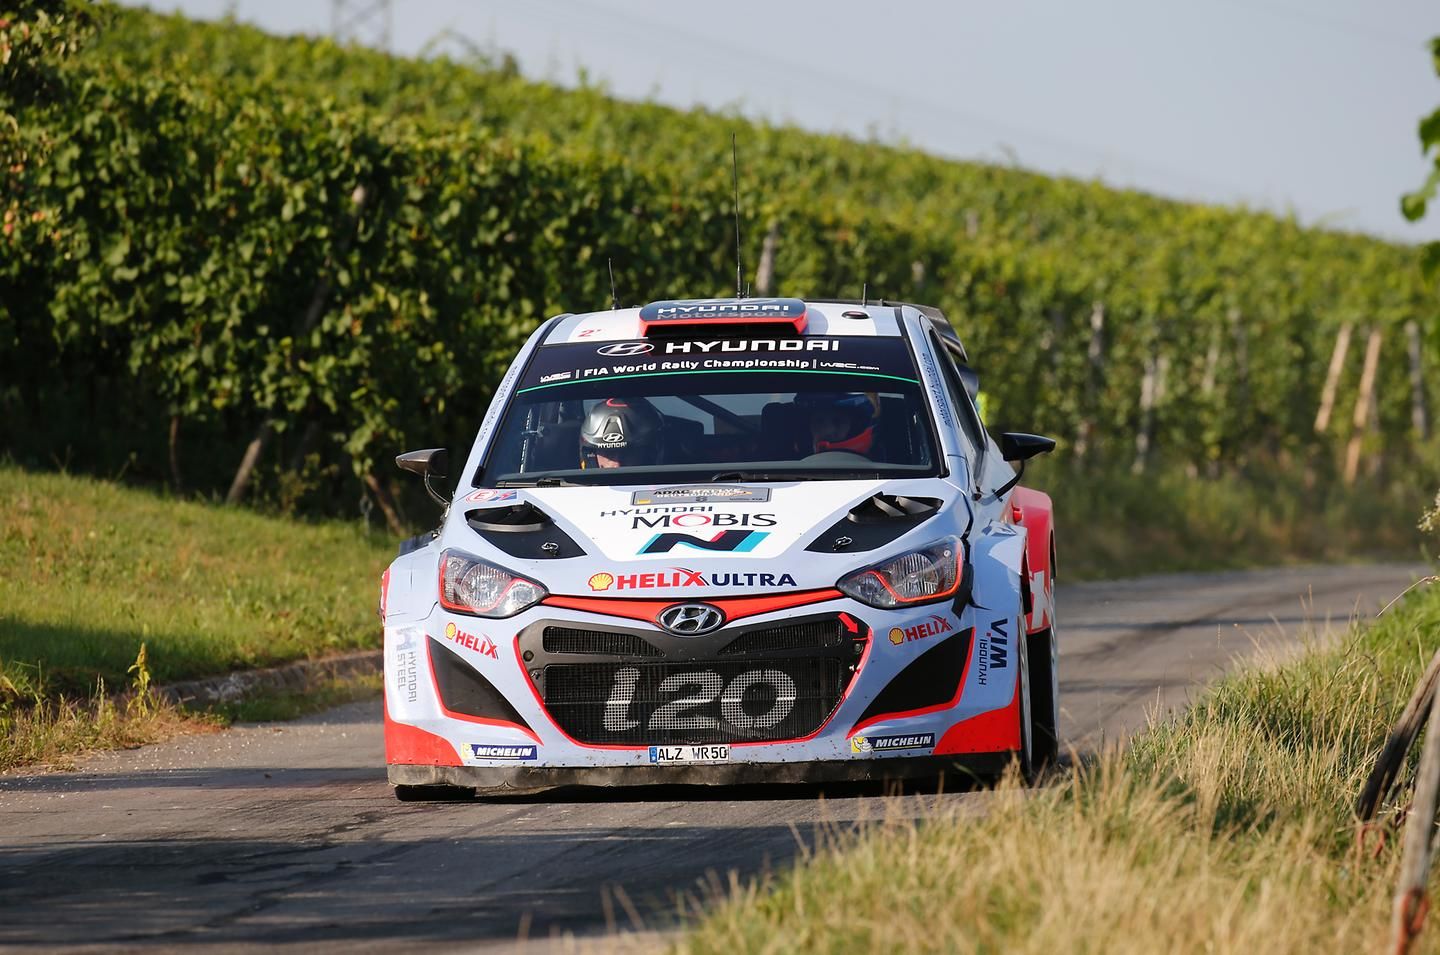 Hyundai Motorsport reclaims second in the championship with double top-five finish in Rallye Deutschland